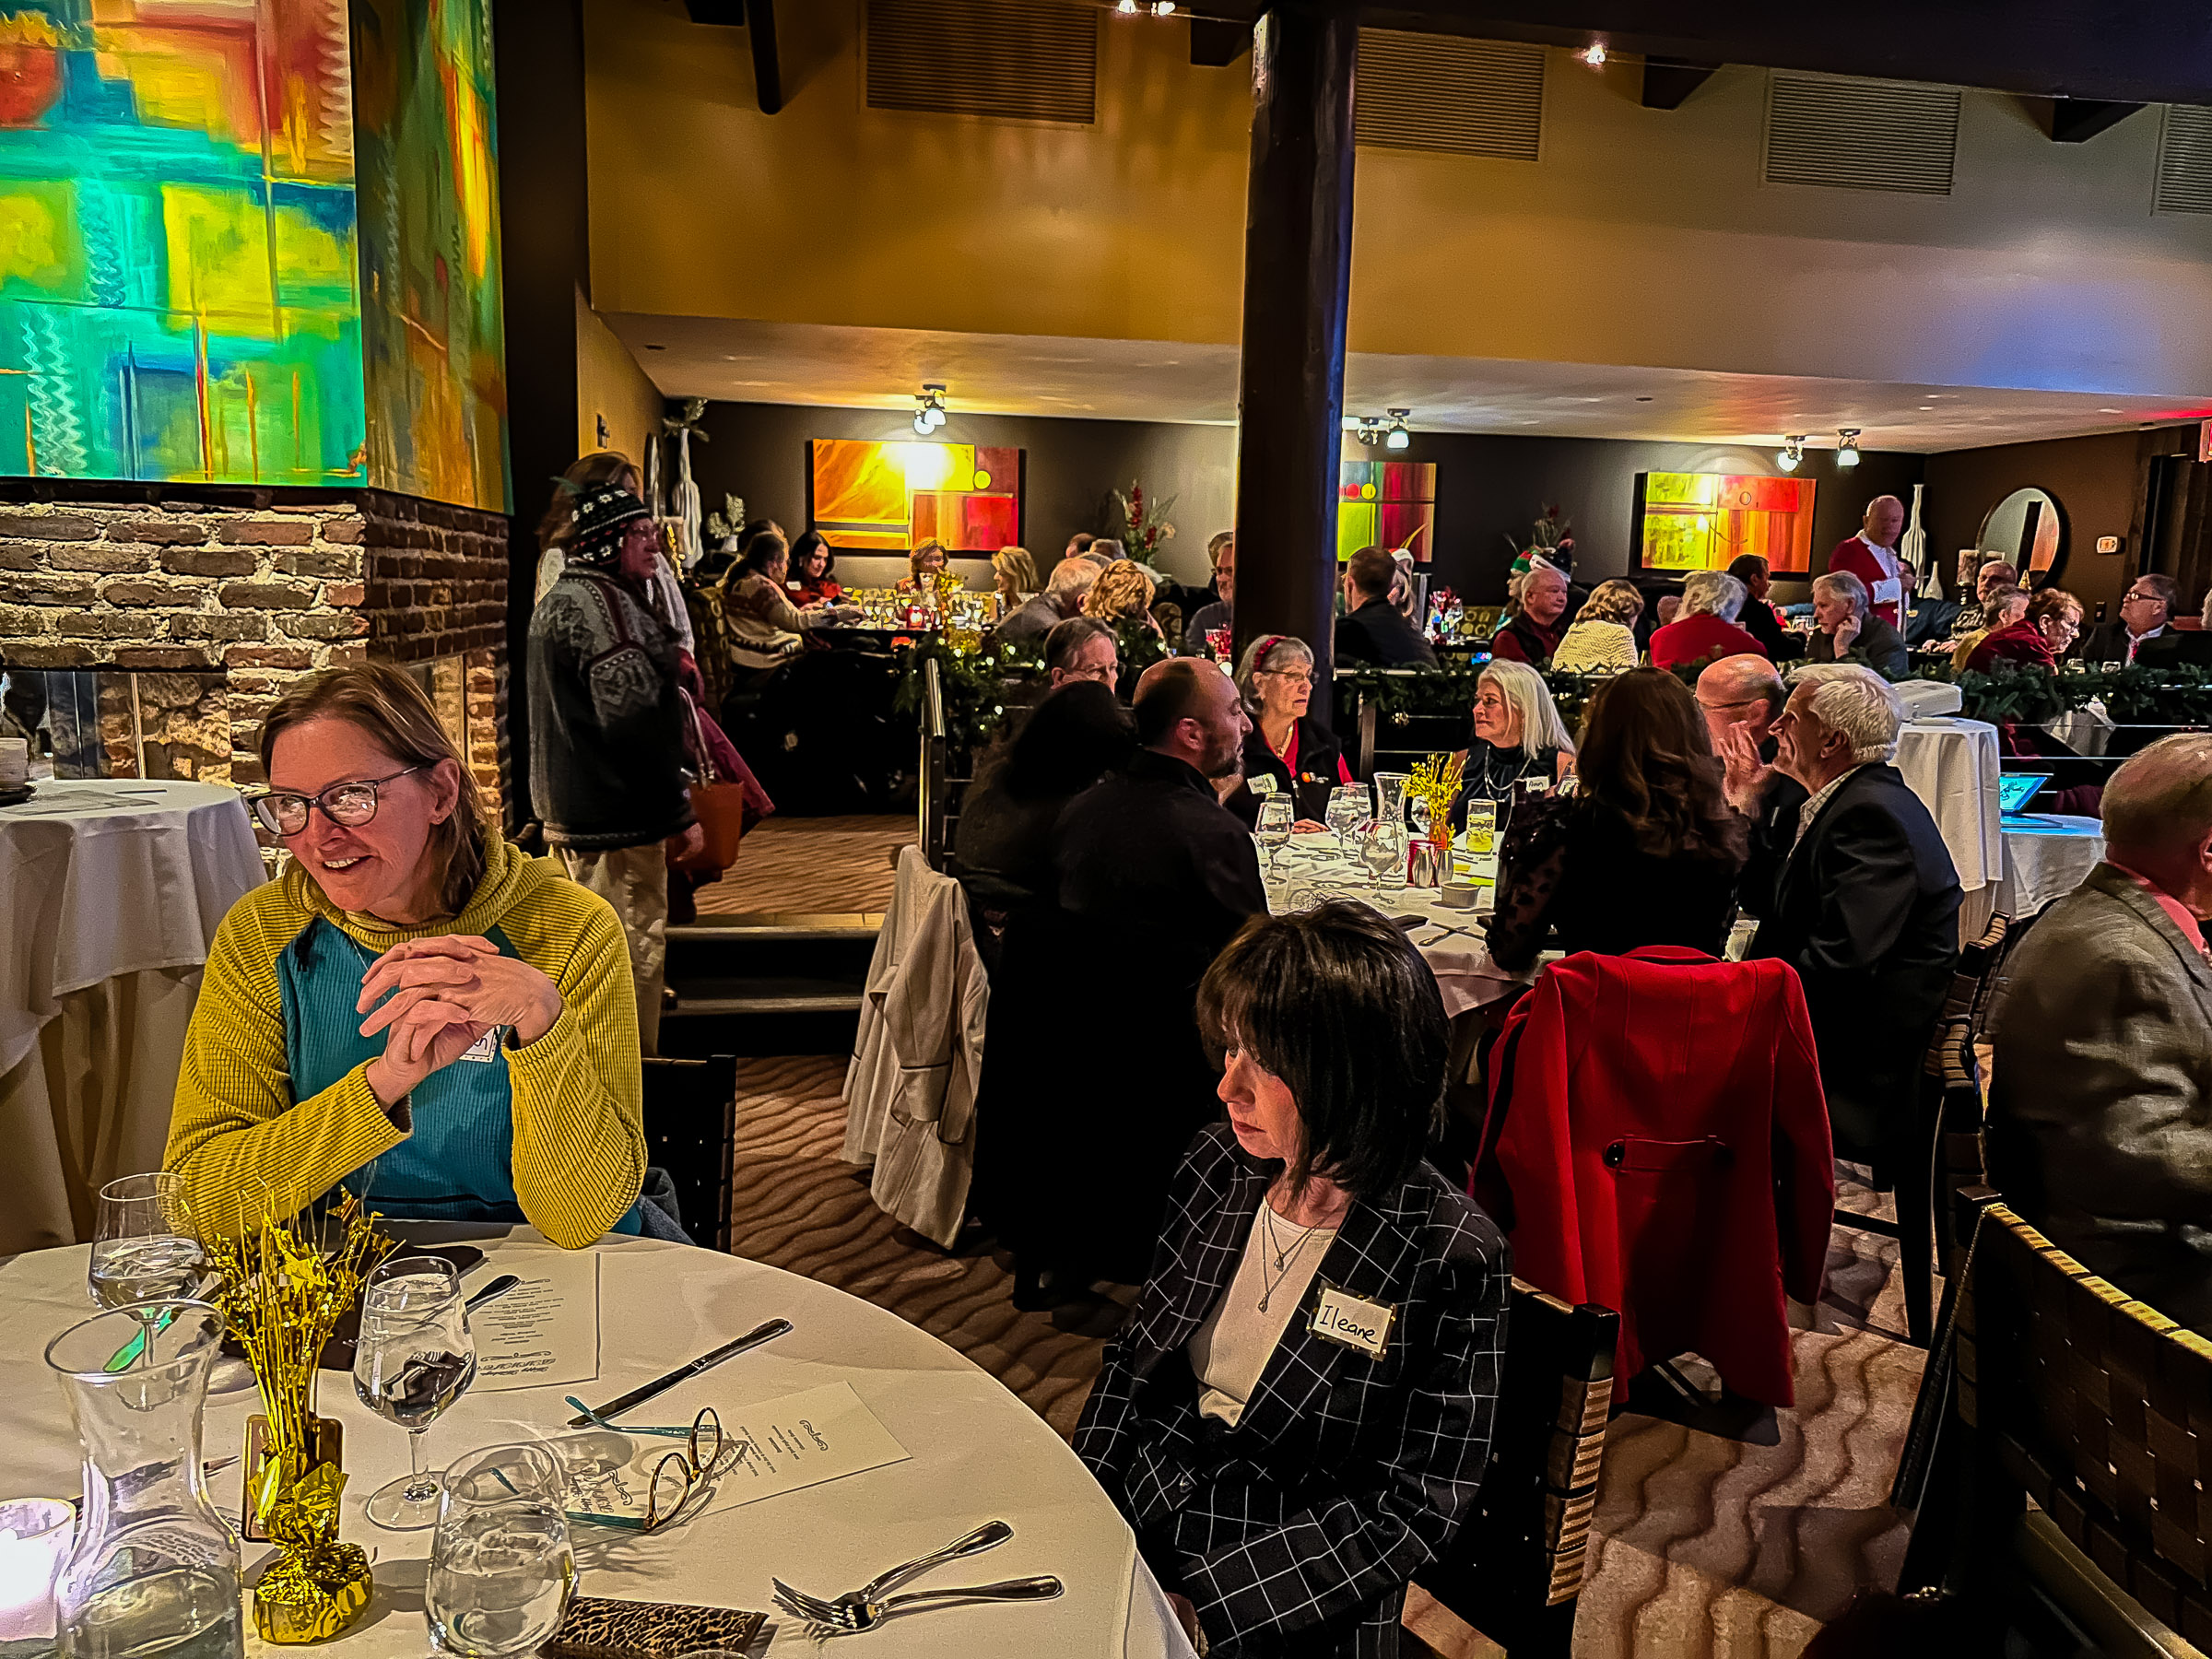 The club had is annual Holiday party at Simms Steak house last night. It's a great venue with an incredible view of the city. We had over 80 members attending for a great time.